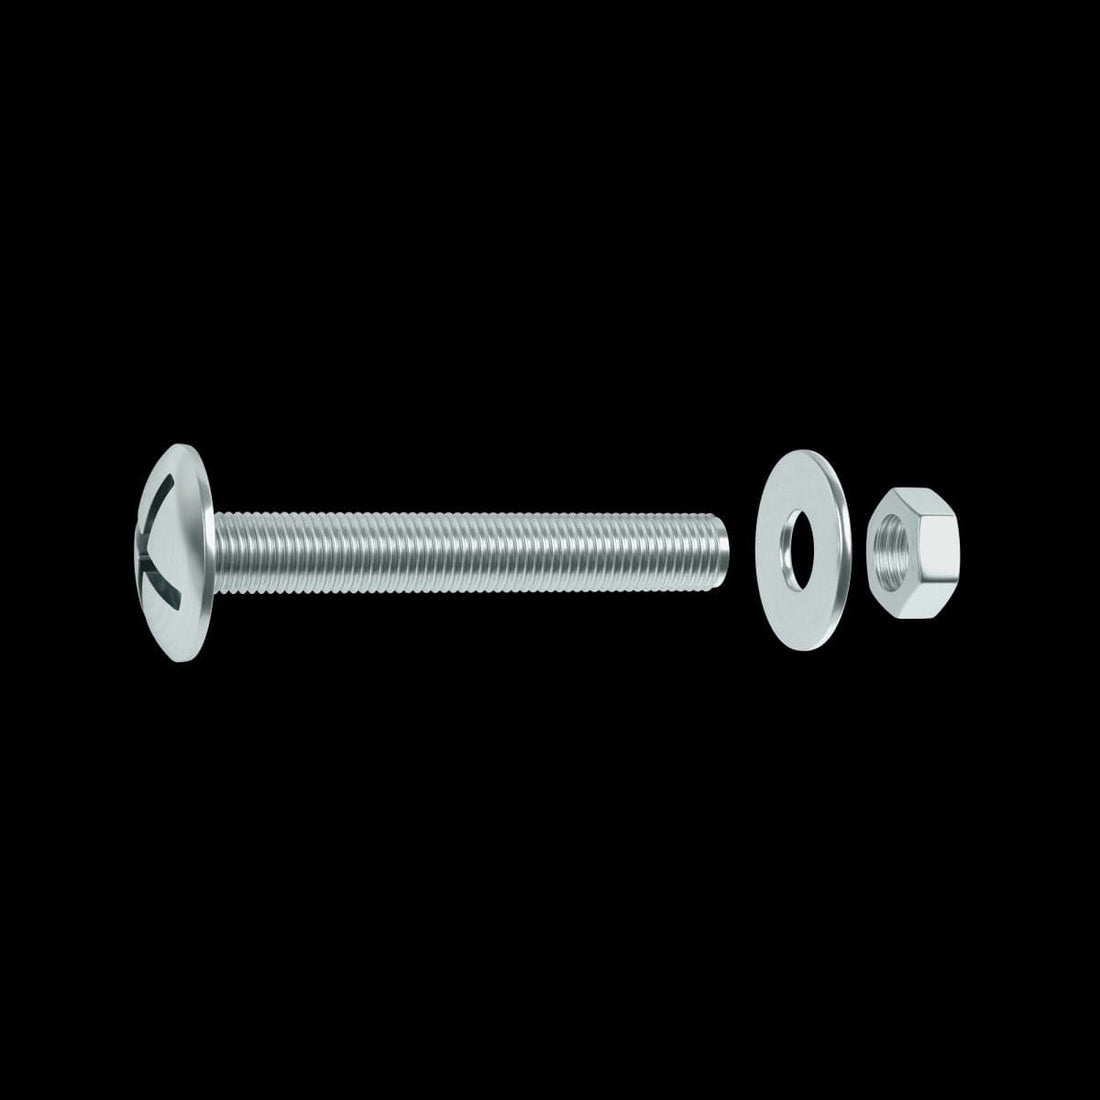 BOLT 5 X 40 MM CROSS-HEAD, NUT AND WASHER STEEL 70 PIECES - best price from Maltashopper.com BR410006399